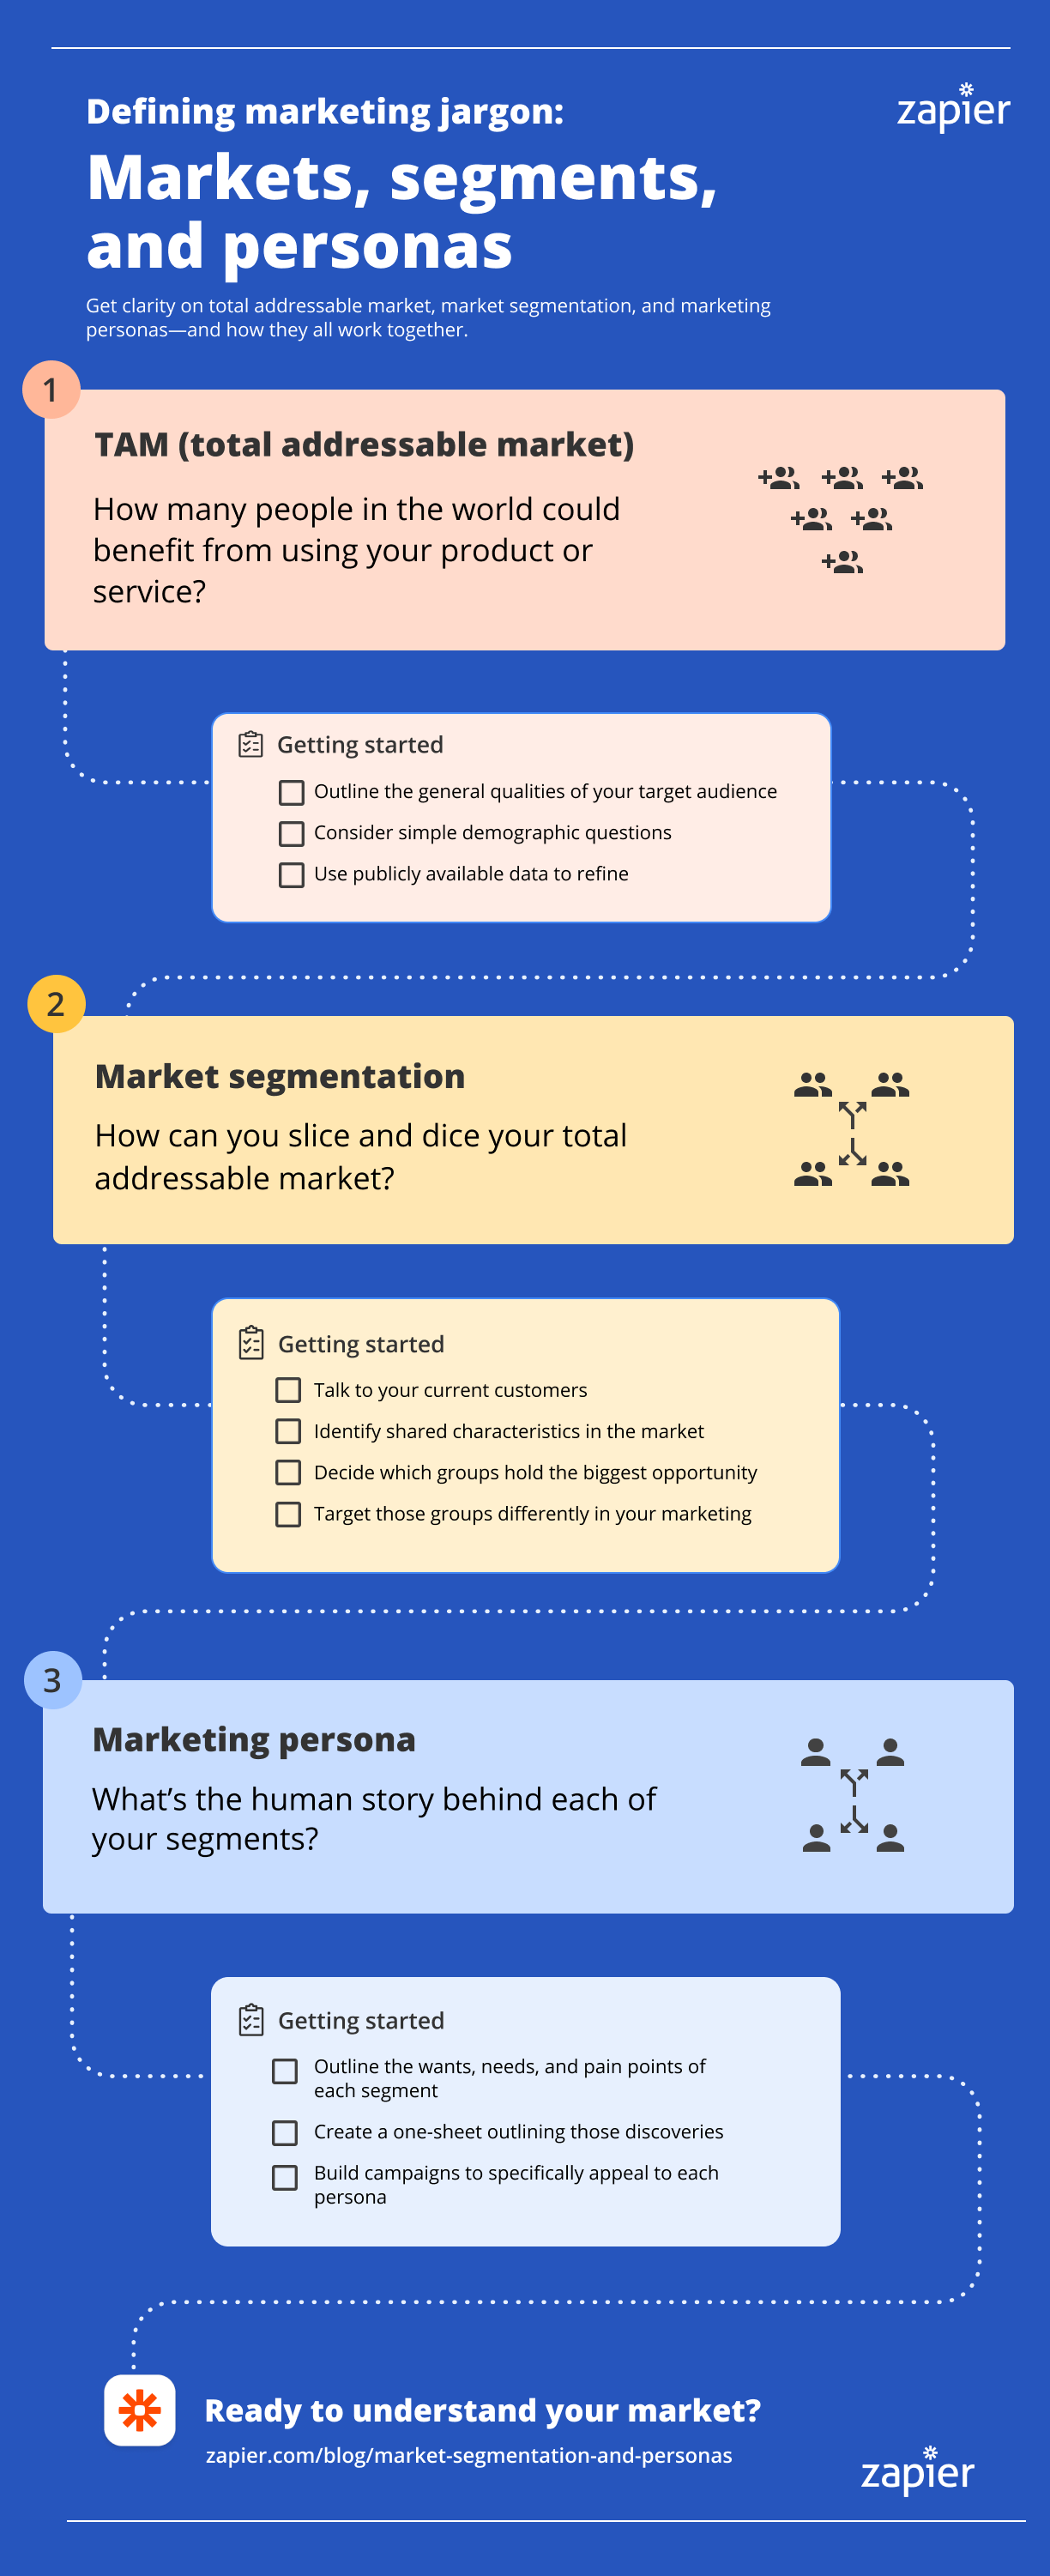 An infographic defining TAM (total addressable market), market segmentation, and marketing persona, including steps for how to get started on each one.